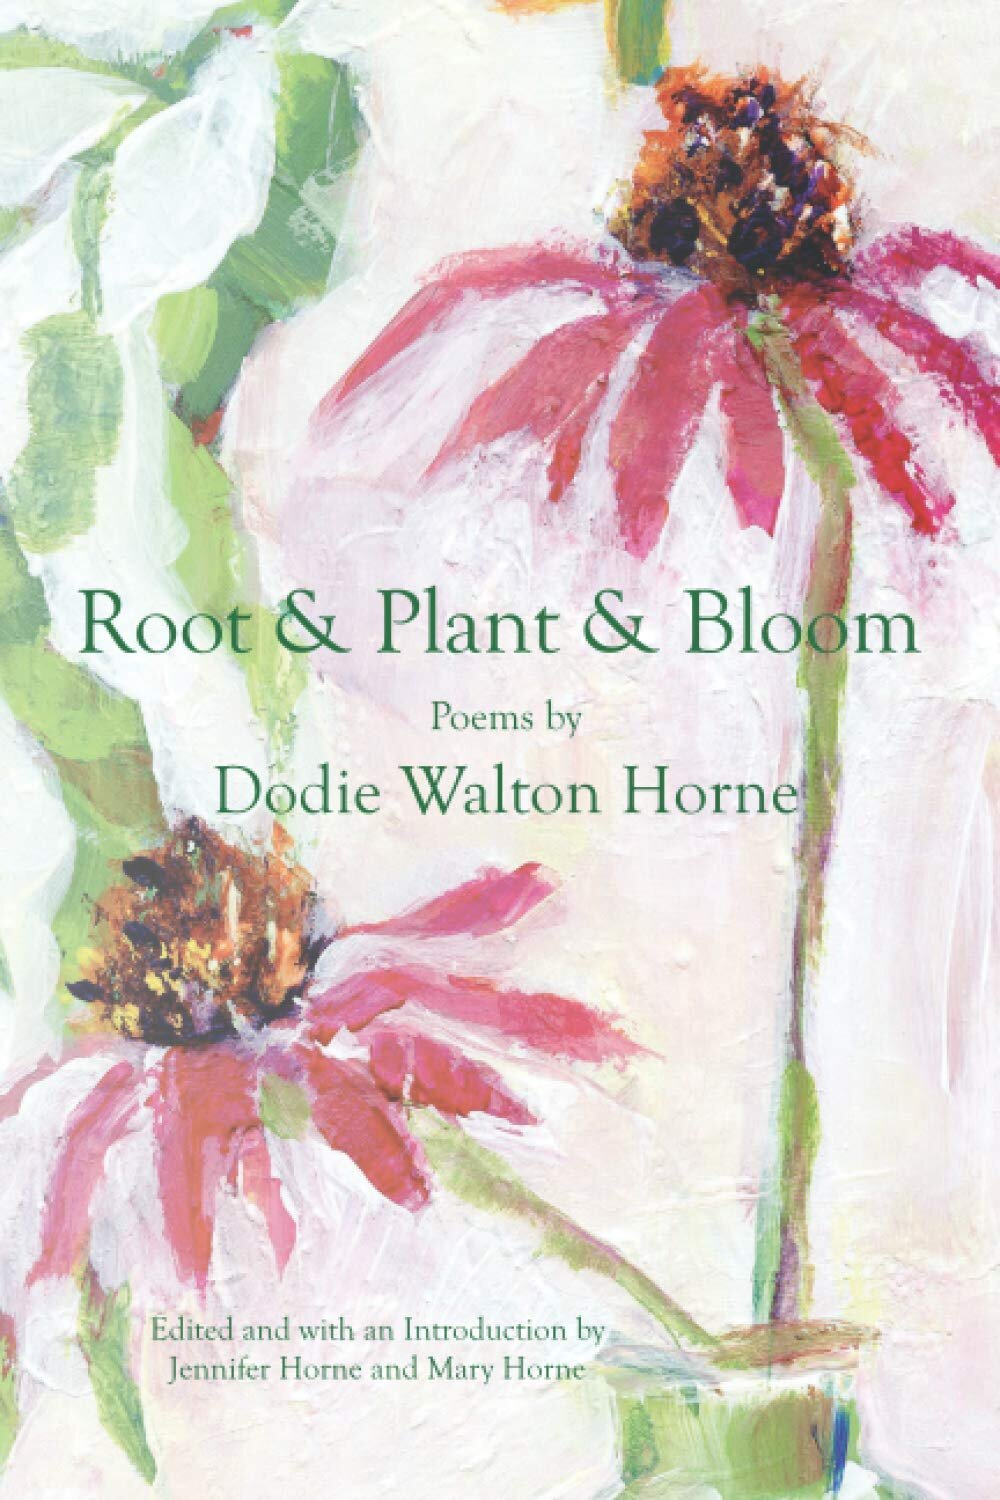 ROOT &amp; PLANT &amp; BLOOM by Dodie Watson Horne